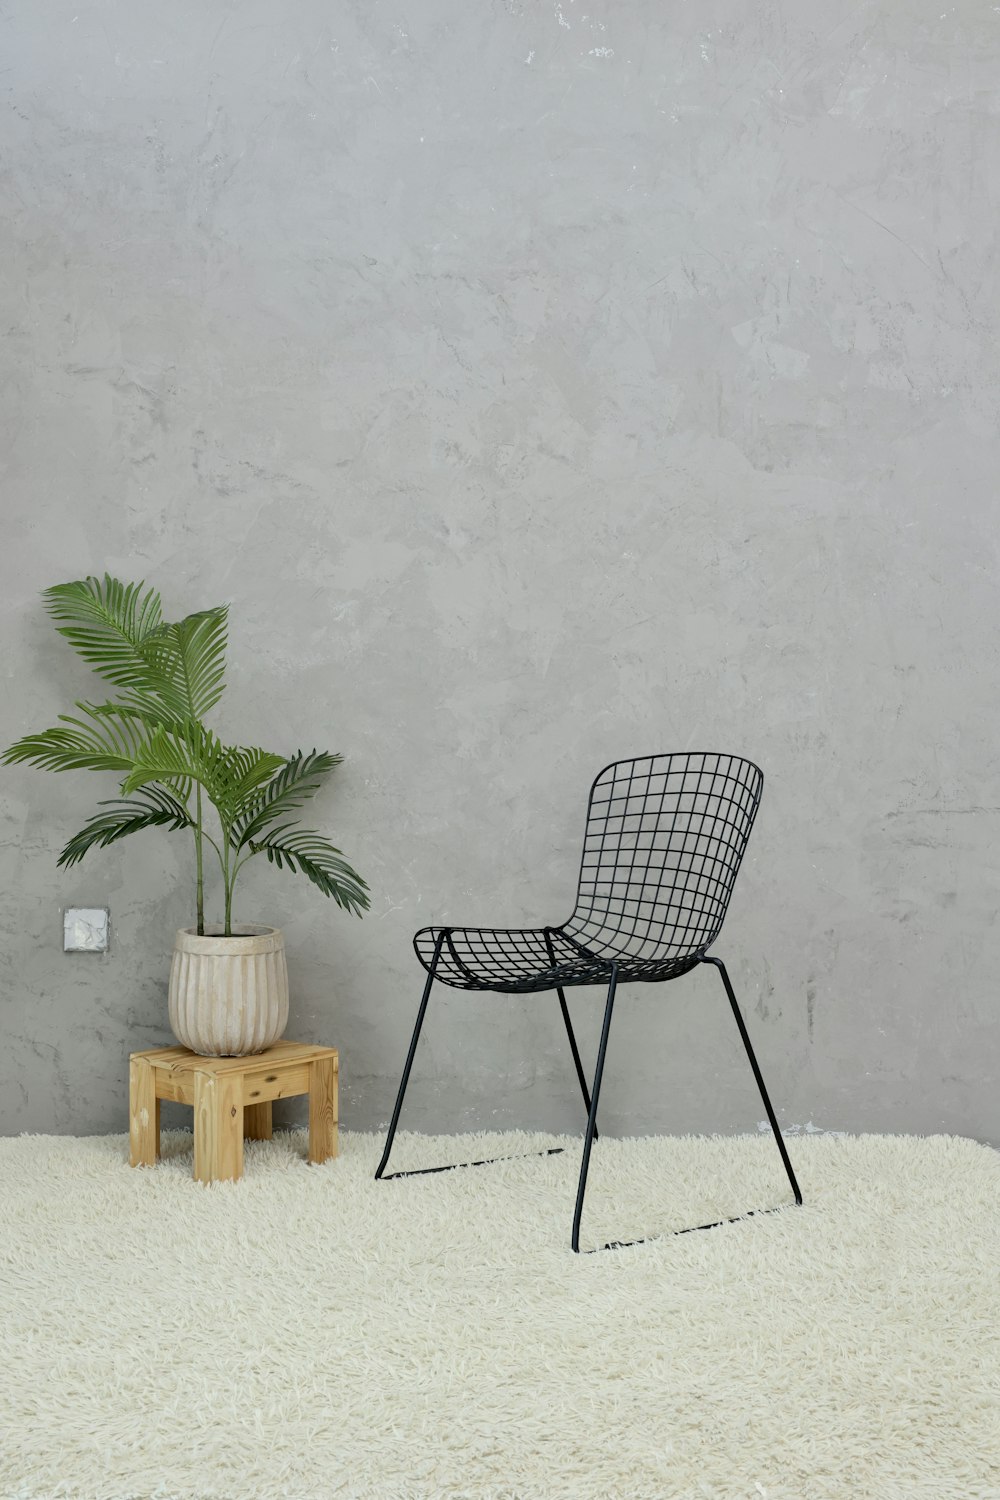 a chair and a plant in a room